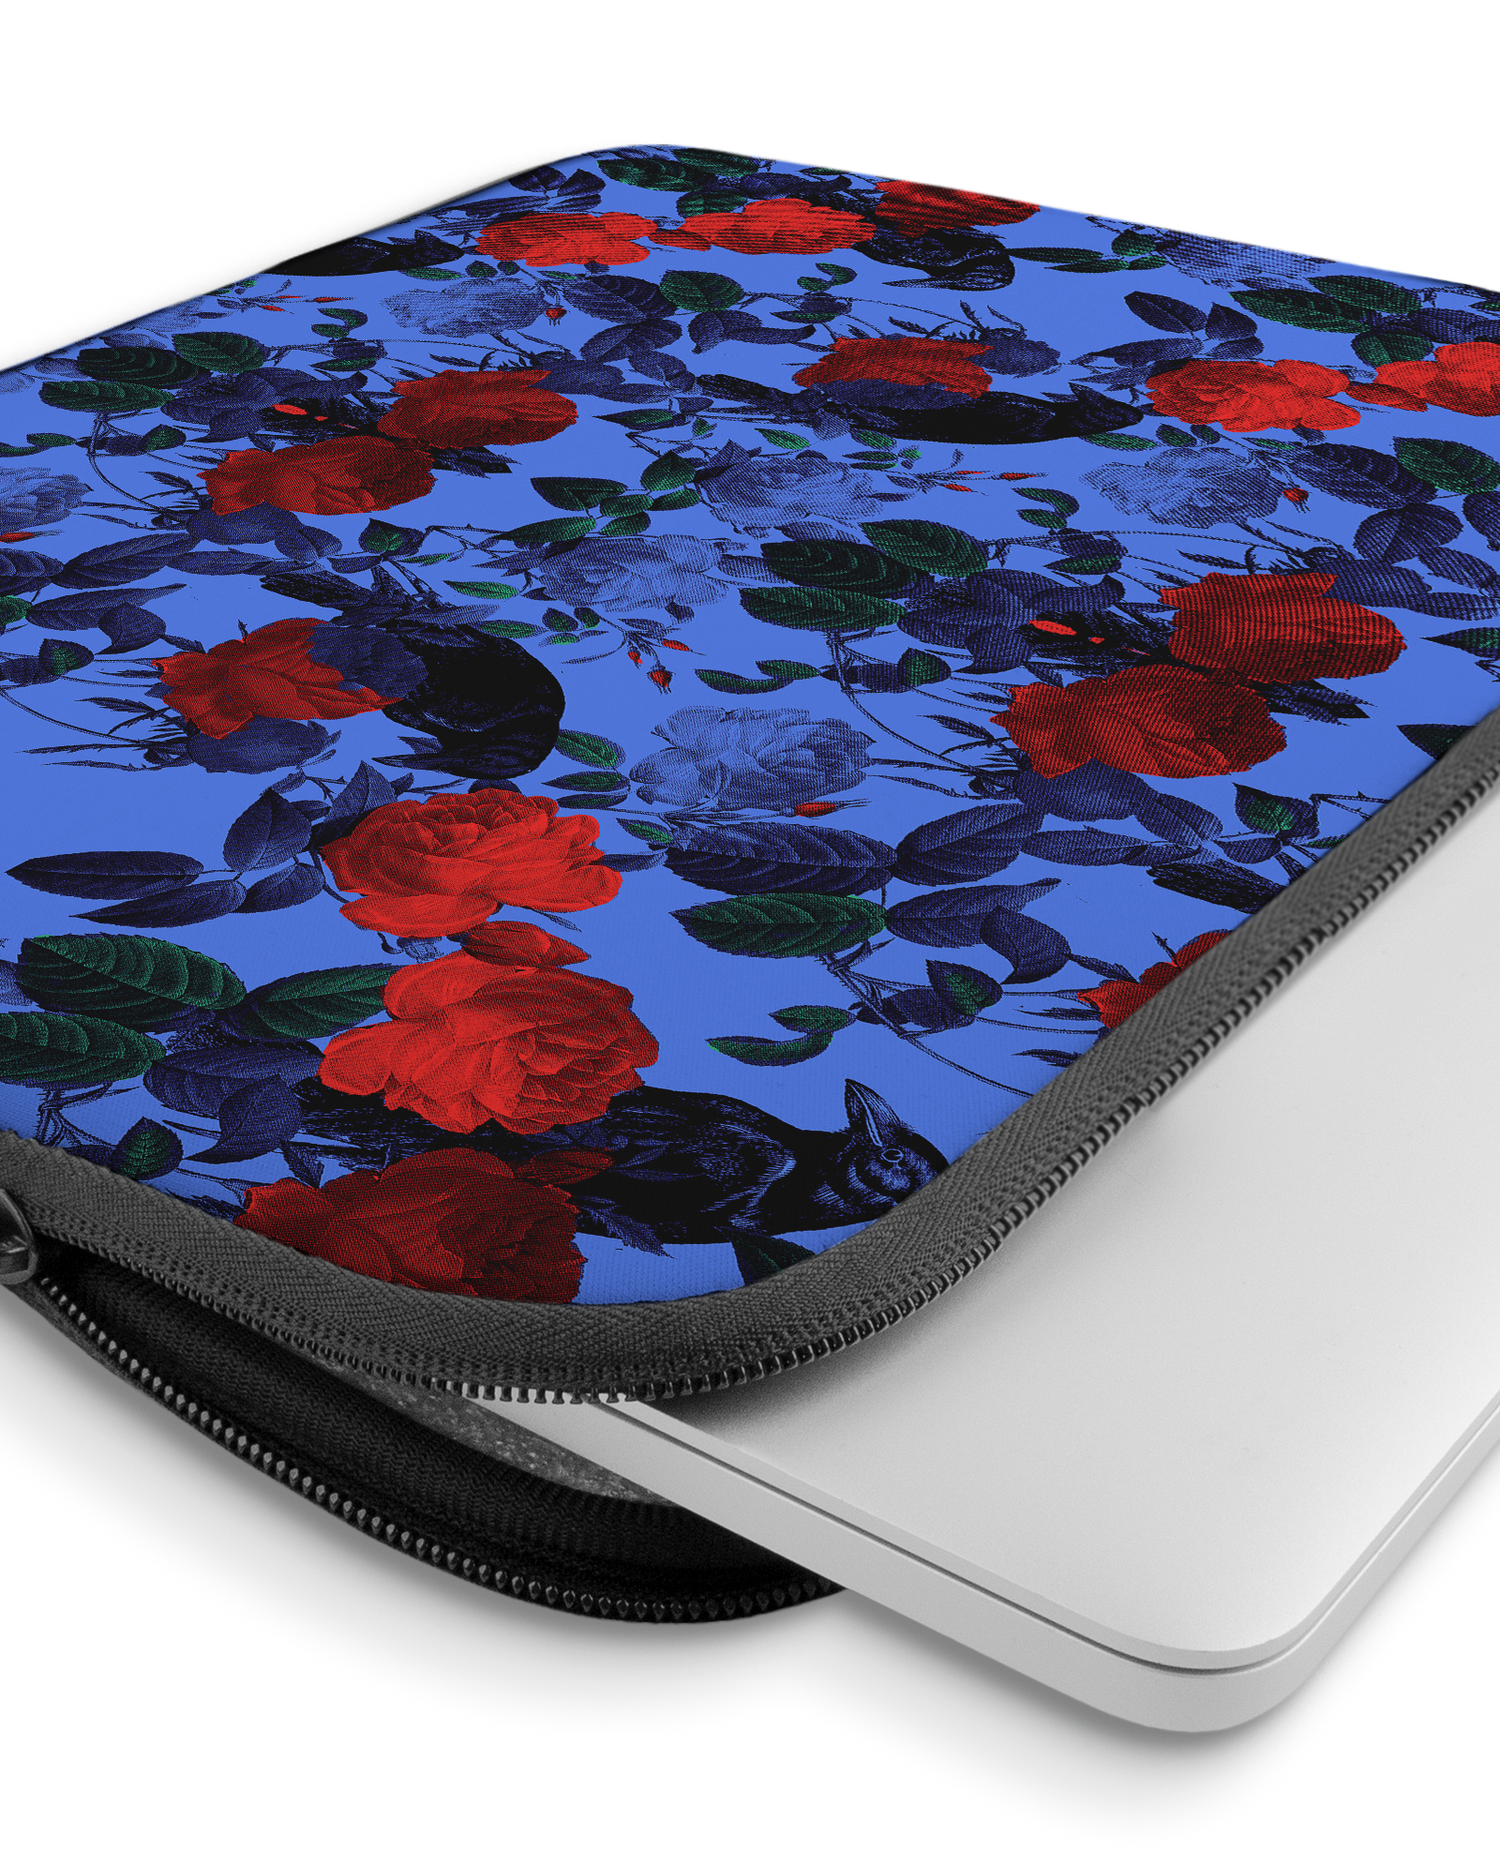 Roses And Ravens Laptop Case 15 inch with device inside